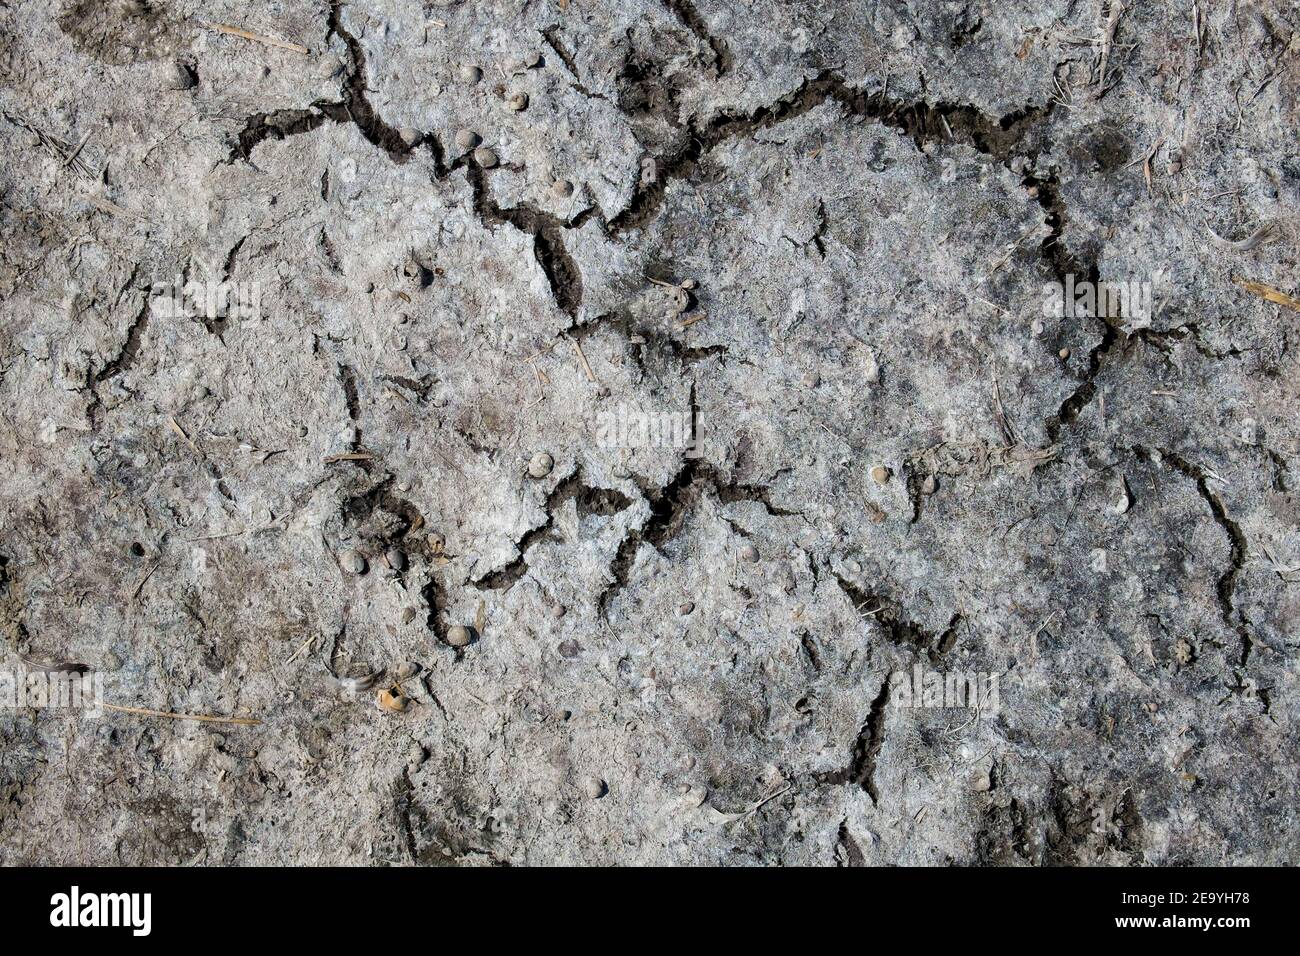 Texture of dry cracked earth with small seashells Stock Photo